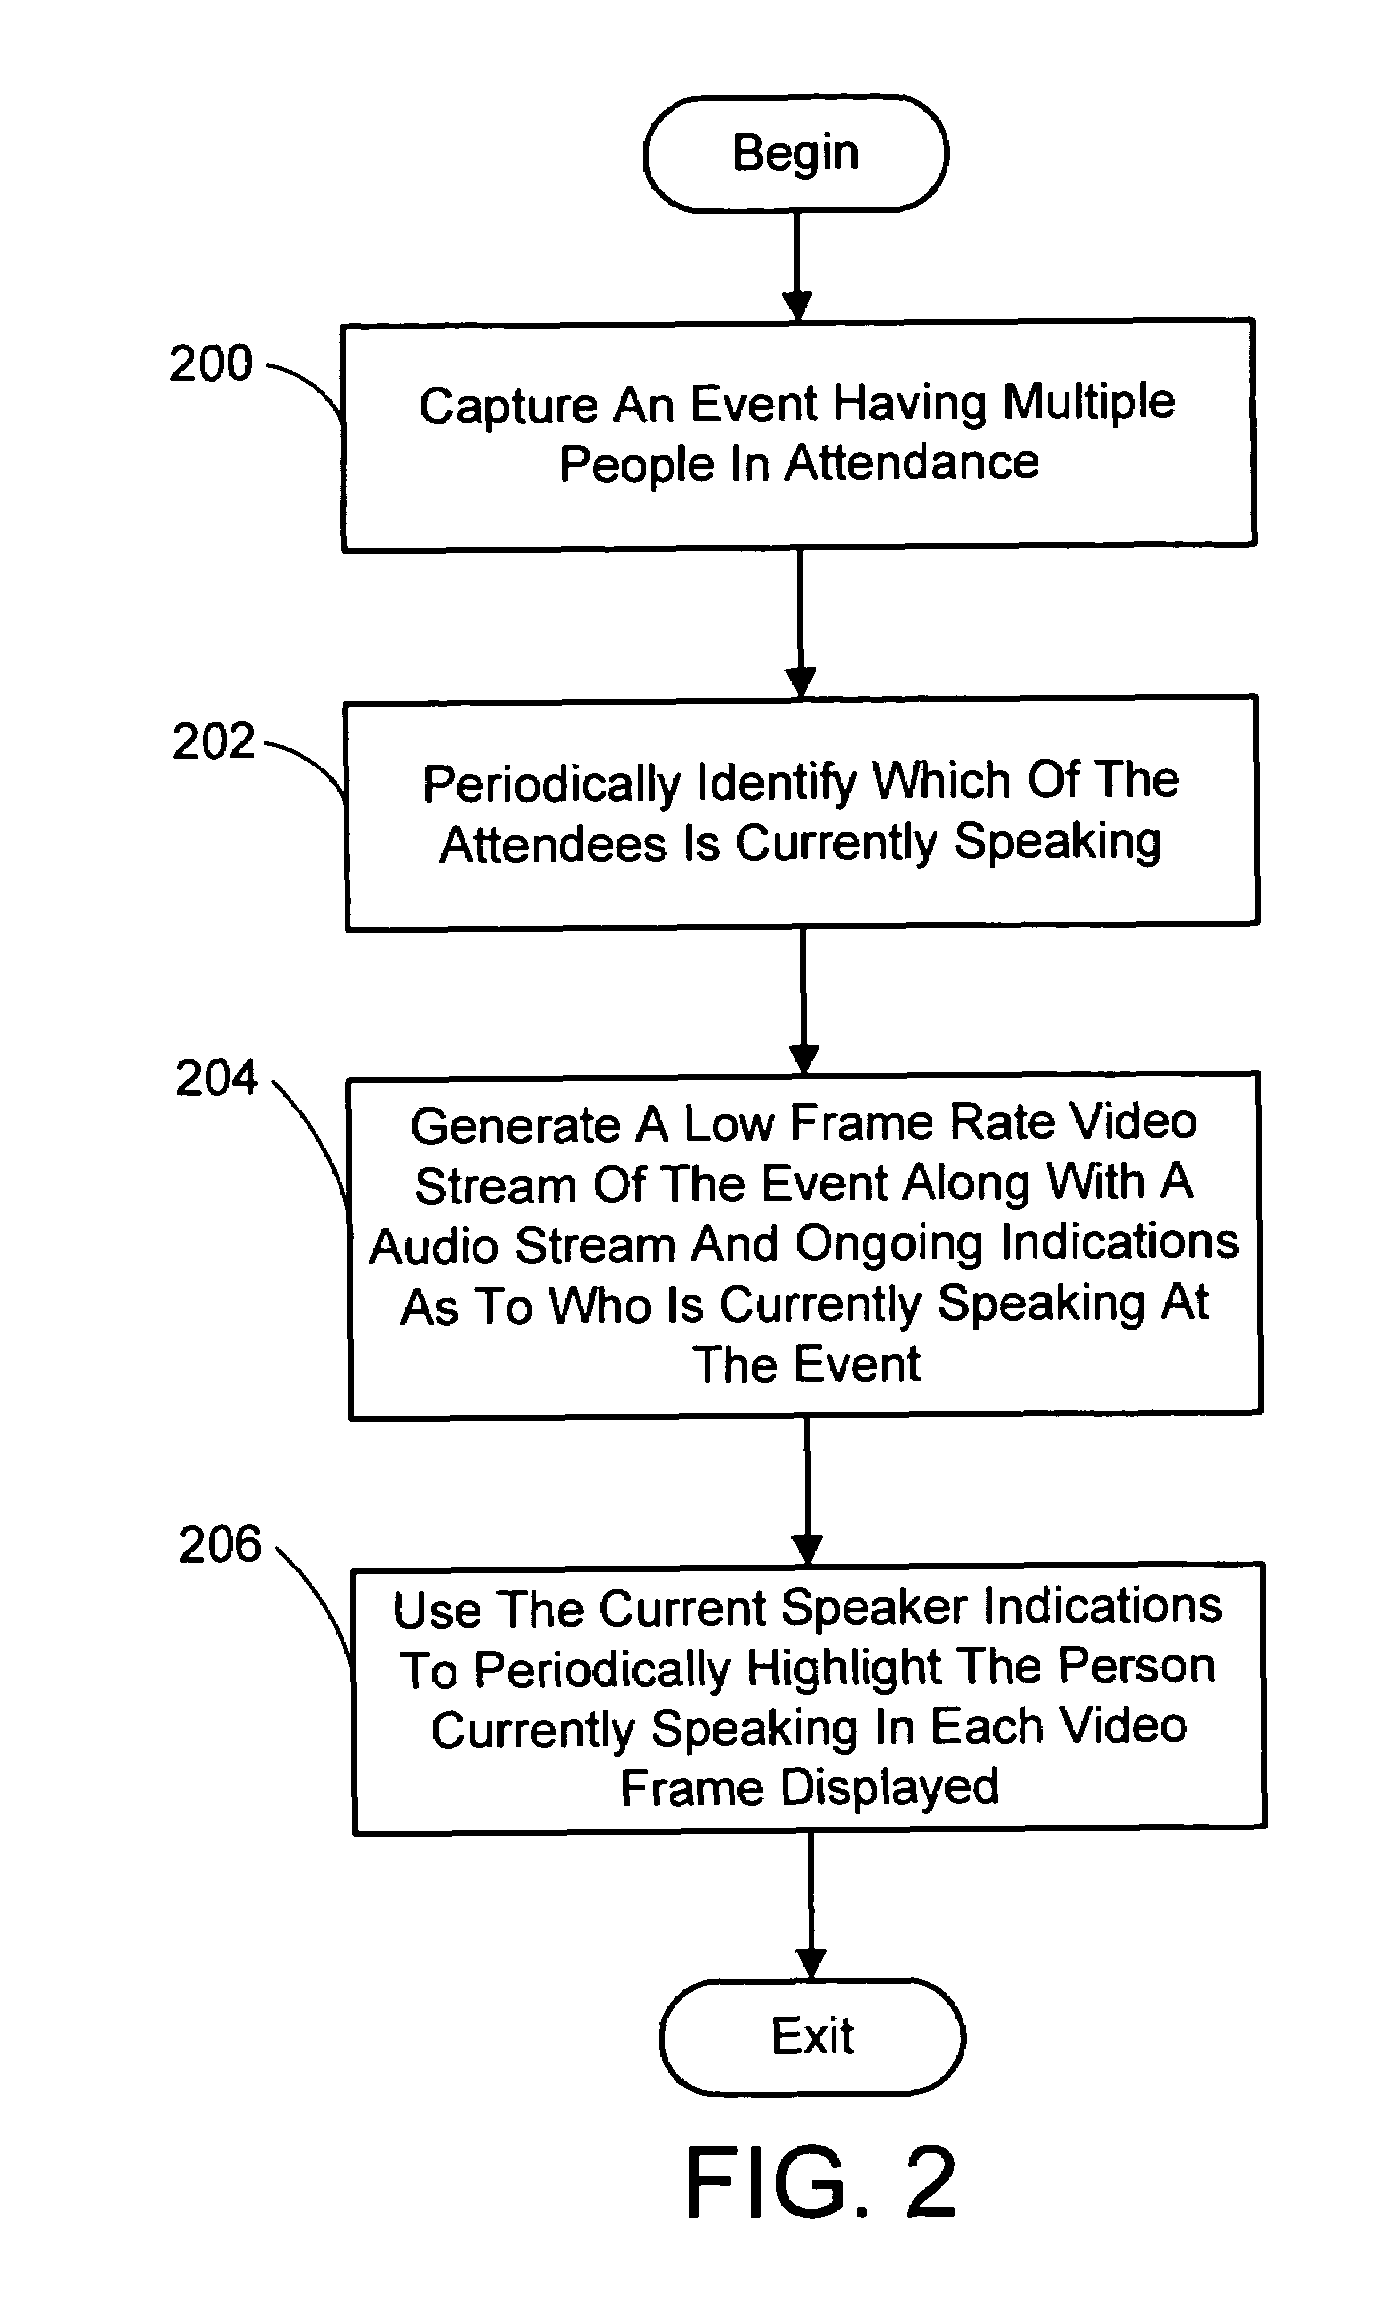 System and process for adding high frame-rate current speaker data to a low frame-rate video using audio watermarking techniques